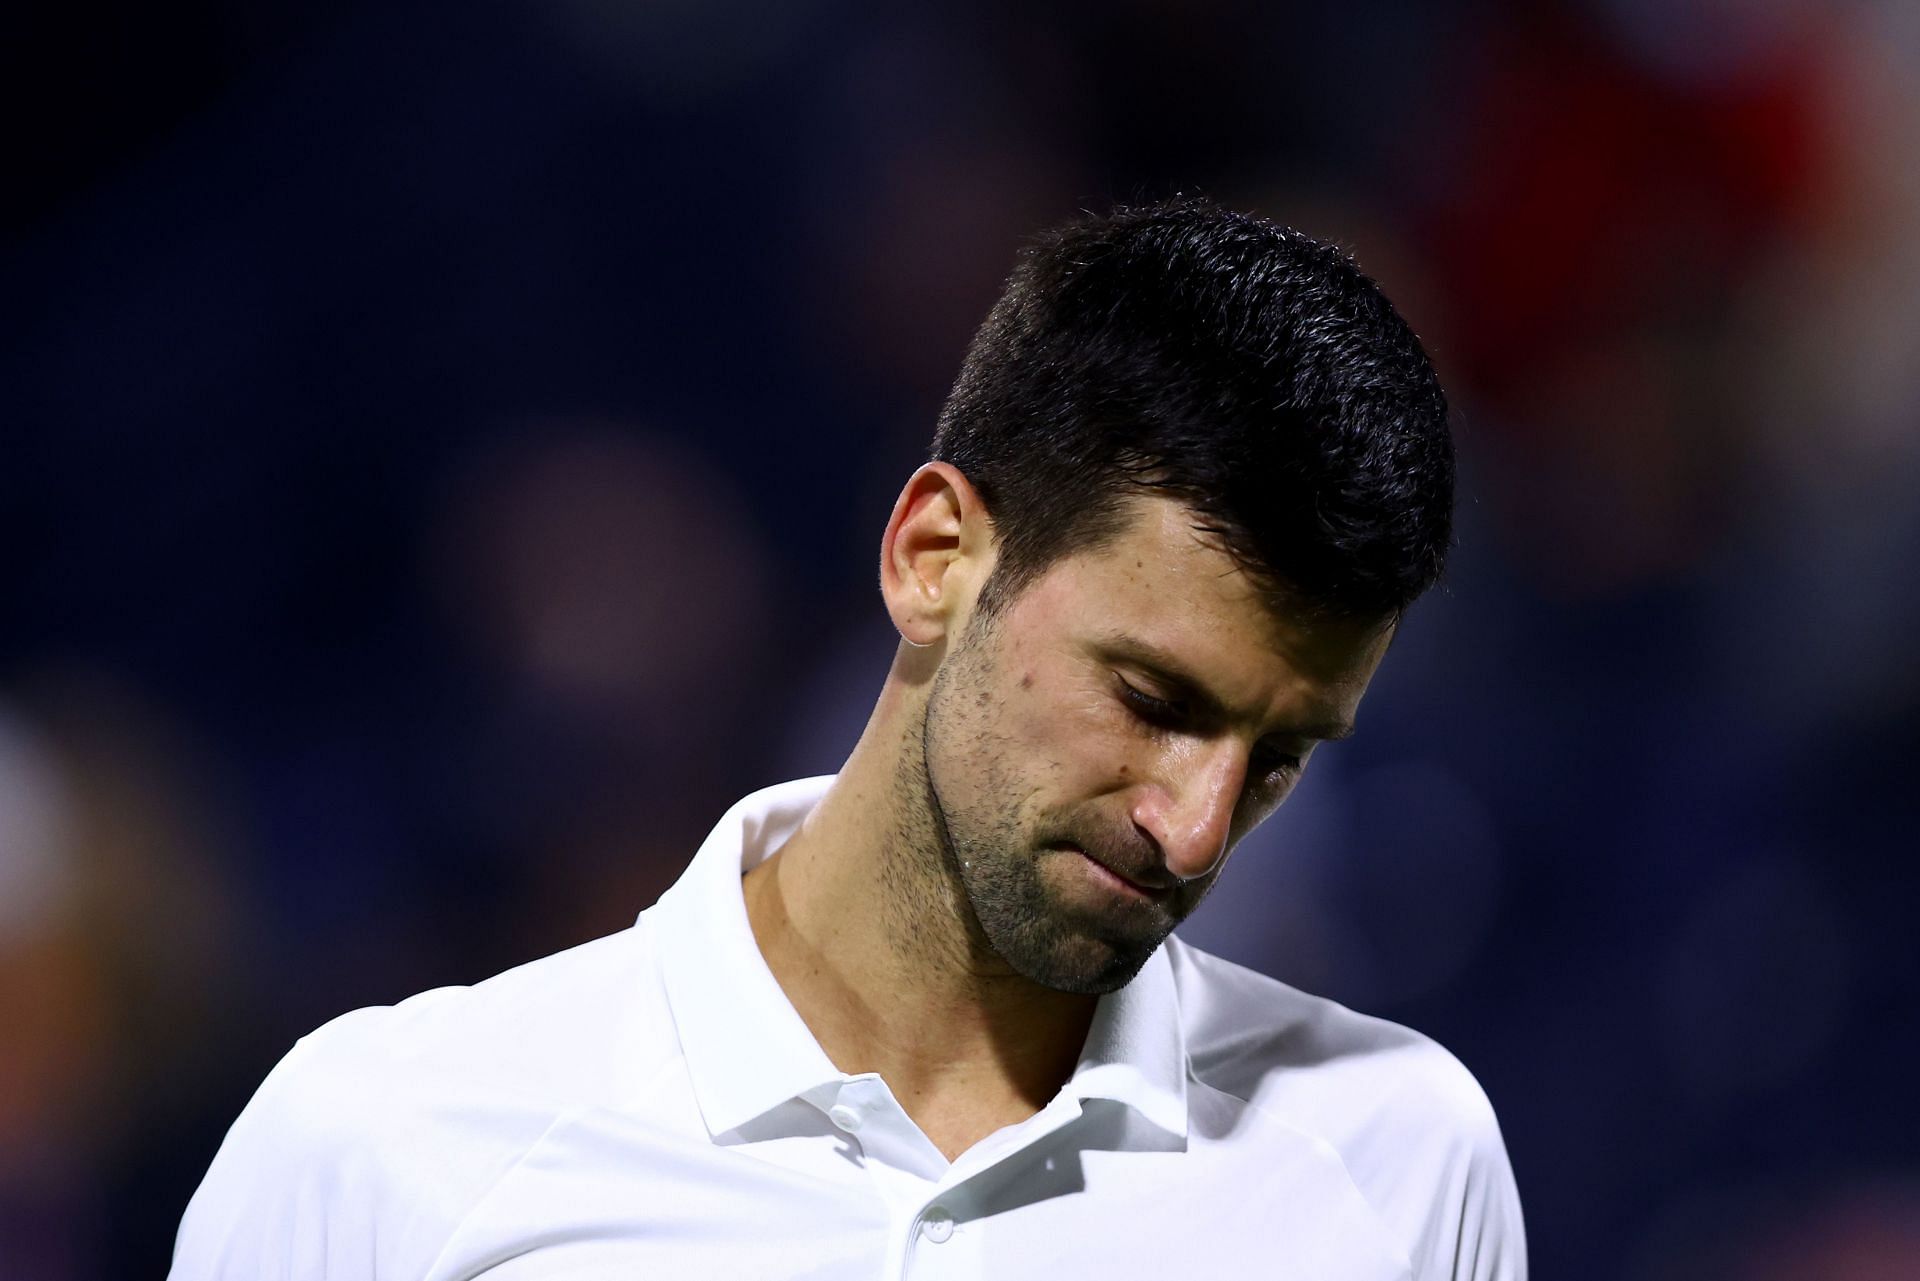 Eterno&#039;s new book takes an in-depth look at Novak Djokovic&#039;s past, present and future